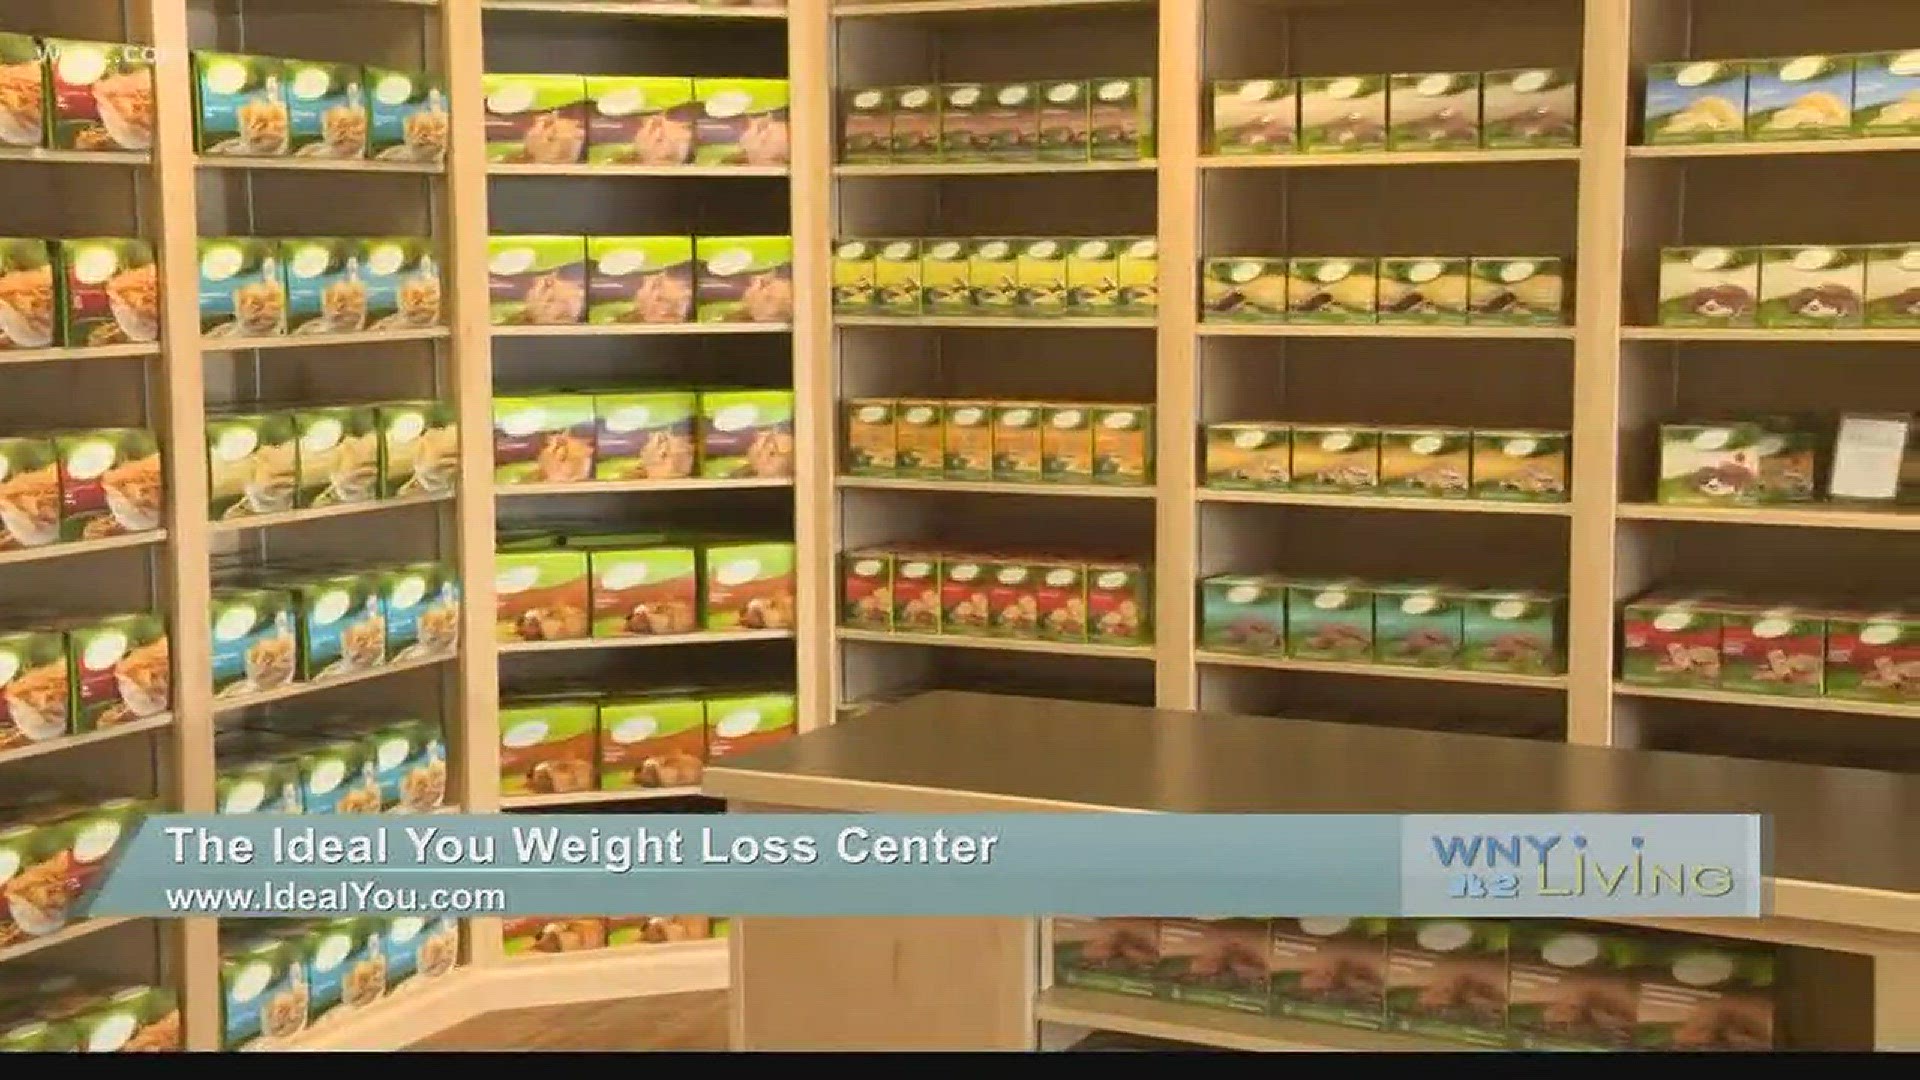 WNY Living - December 2 - The Ideal You Weight Loss Center